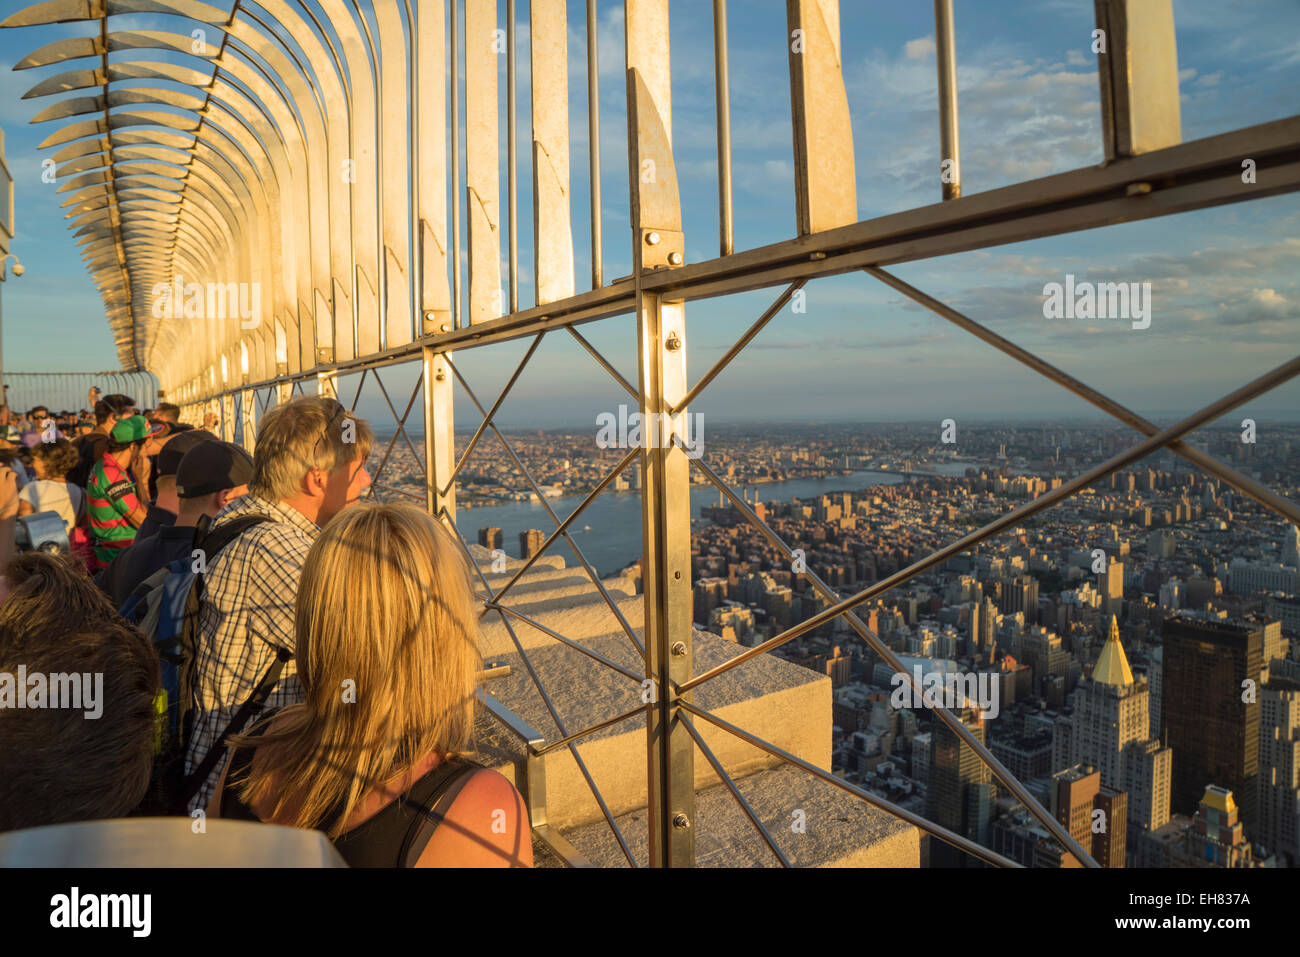 Tourists at the Empire State Building viewing platform enjoying the view, Manhattan, New York City, New York, USA Stock Photo